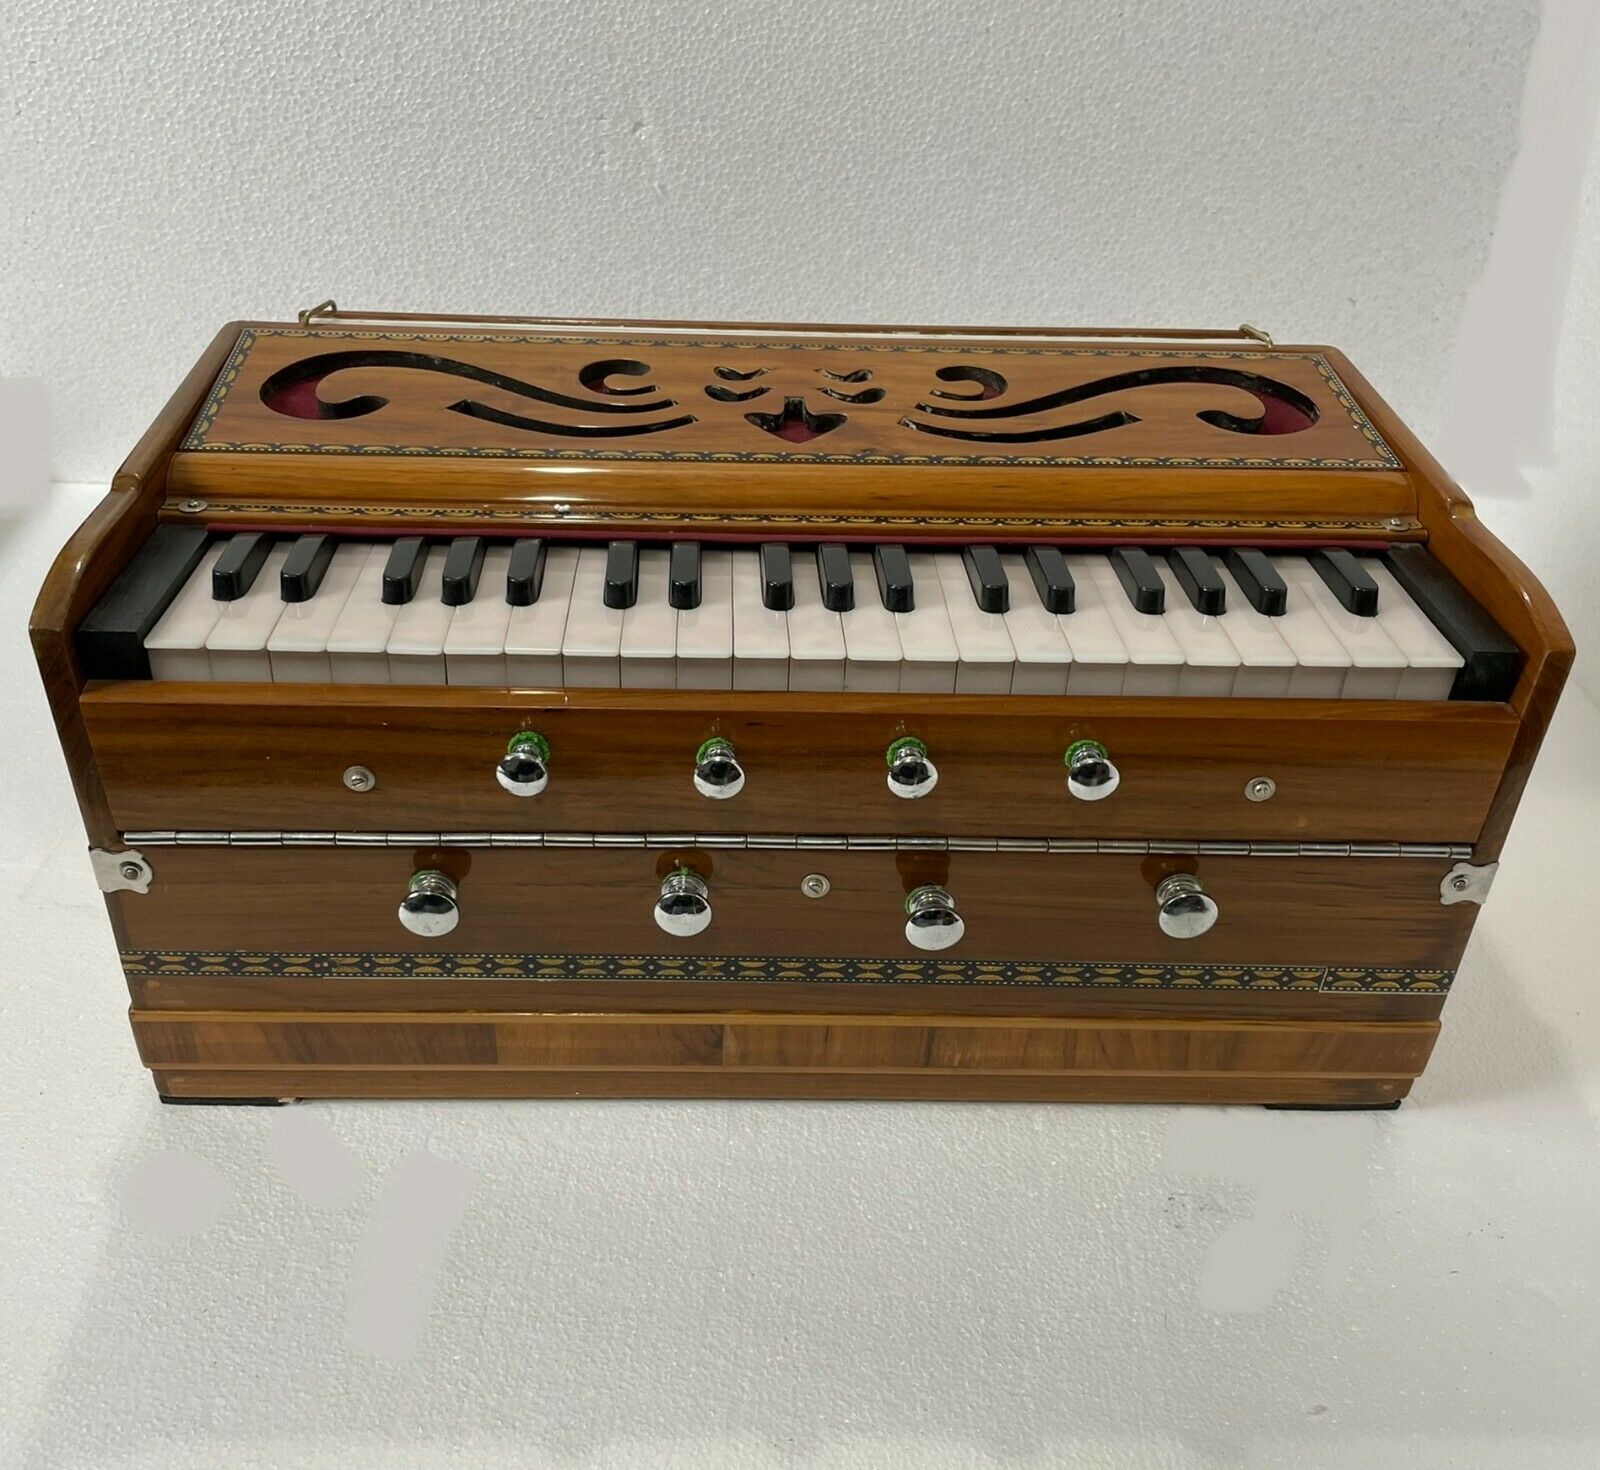 HARMONIUM   *ITEM LOCATED IN USA. SHIPS WITHIN 24 HOURS.* *BRAND NEW*